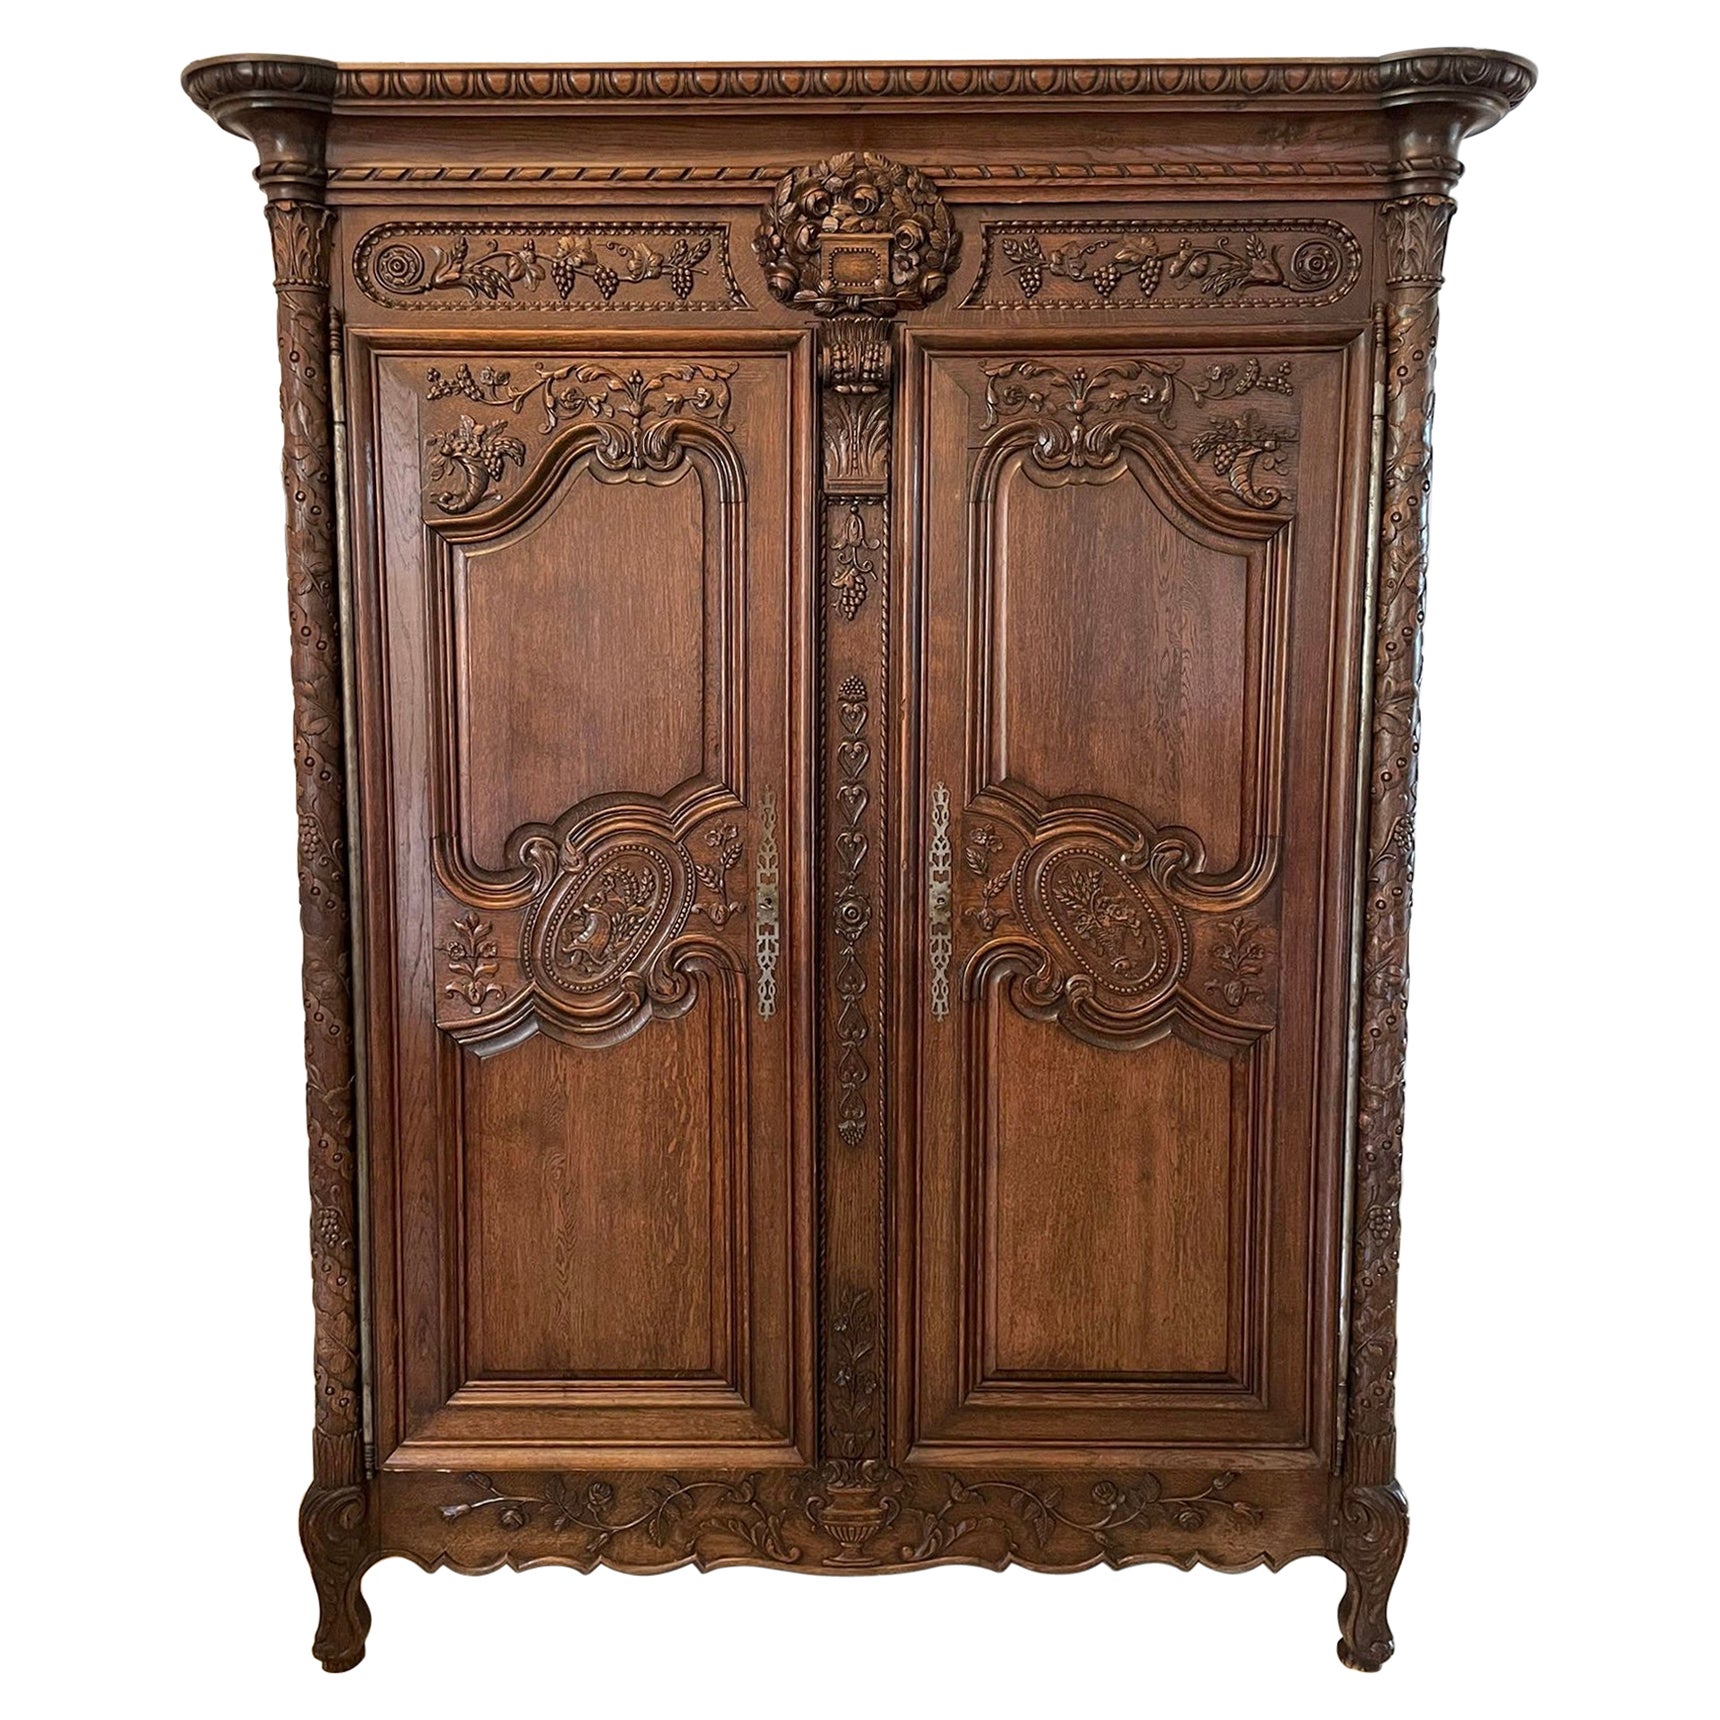 Outstanding Quality Antique Victorian Large Carved Oak Wardrobe